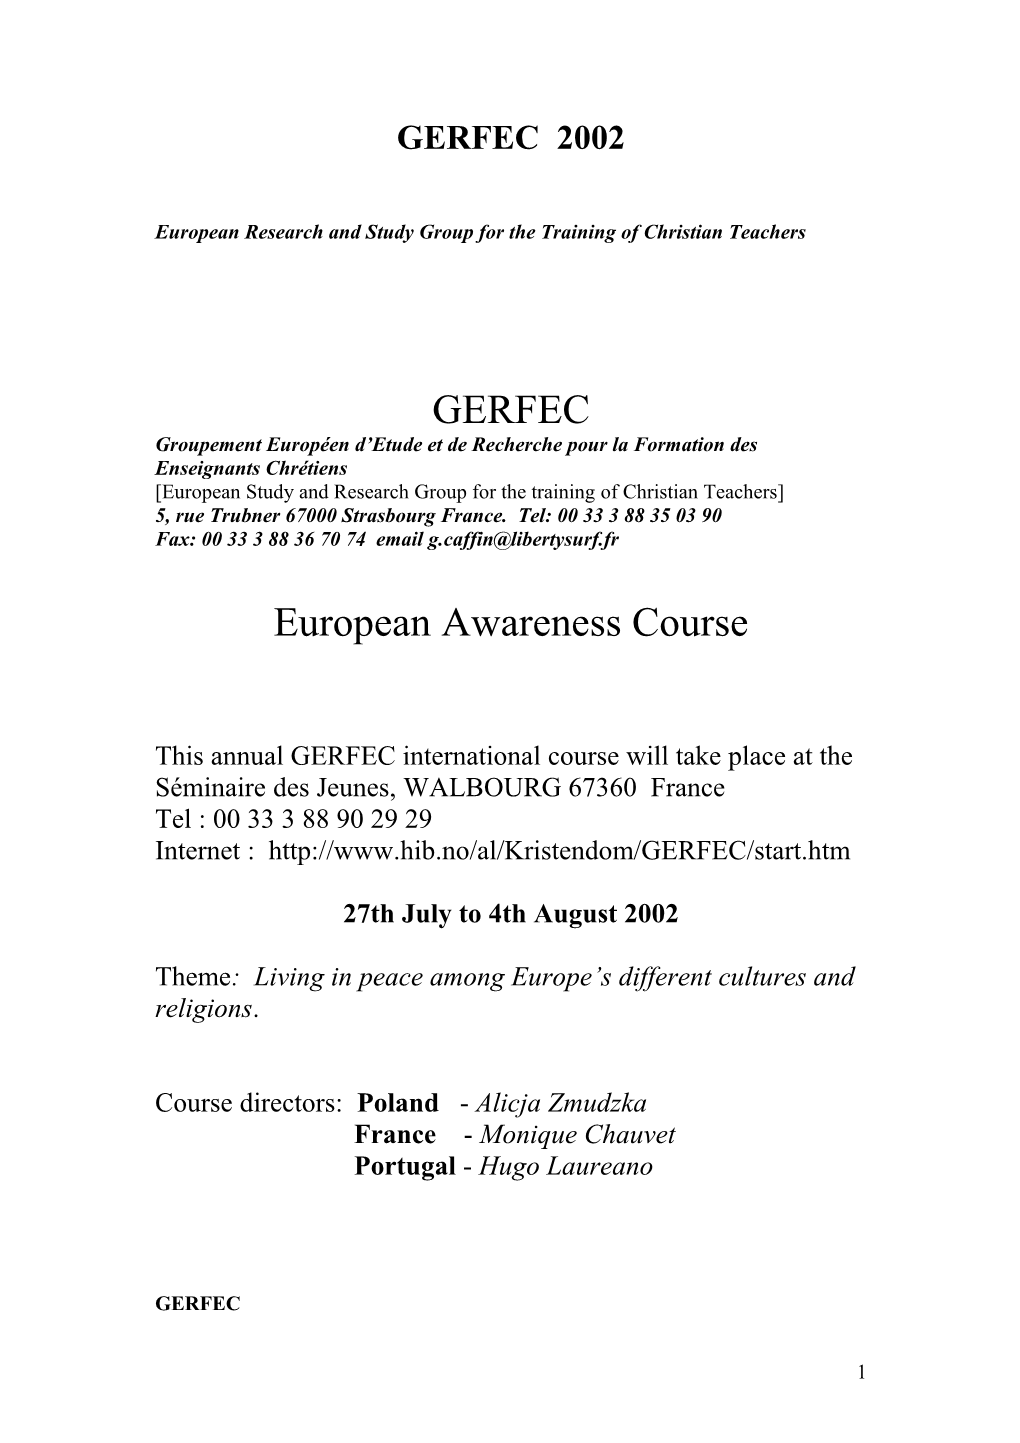 European Research and Study Group for the Training of Christian Teachers